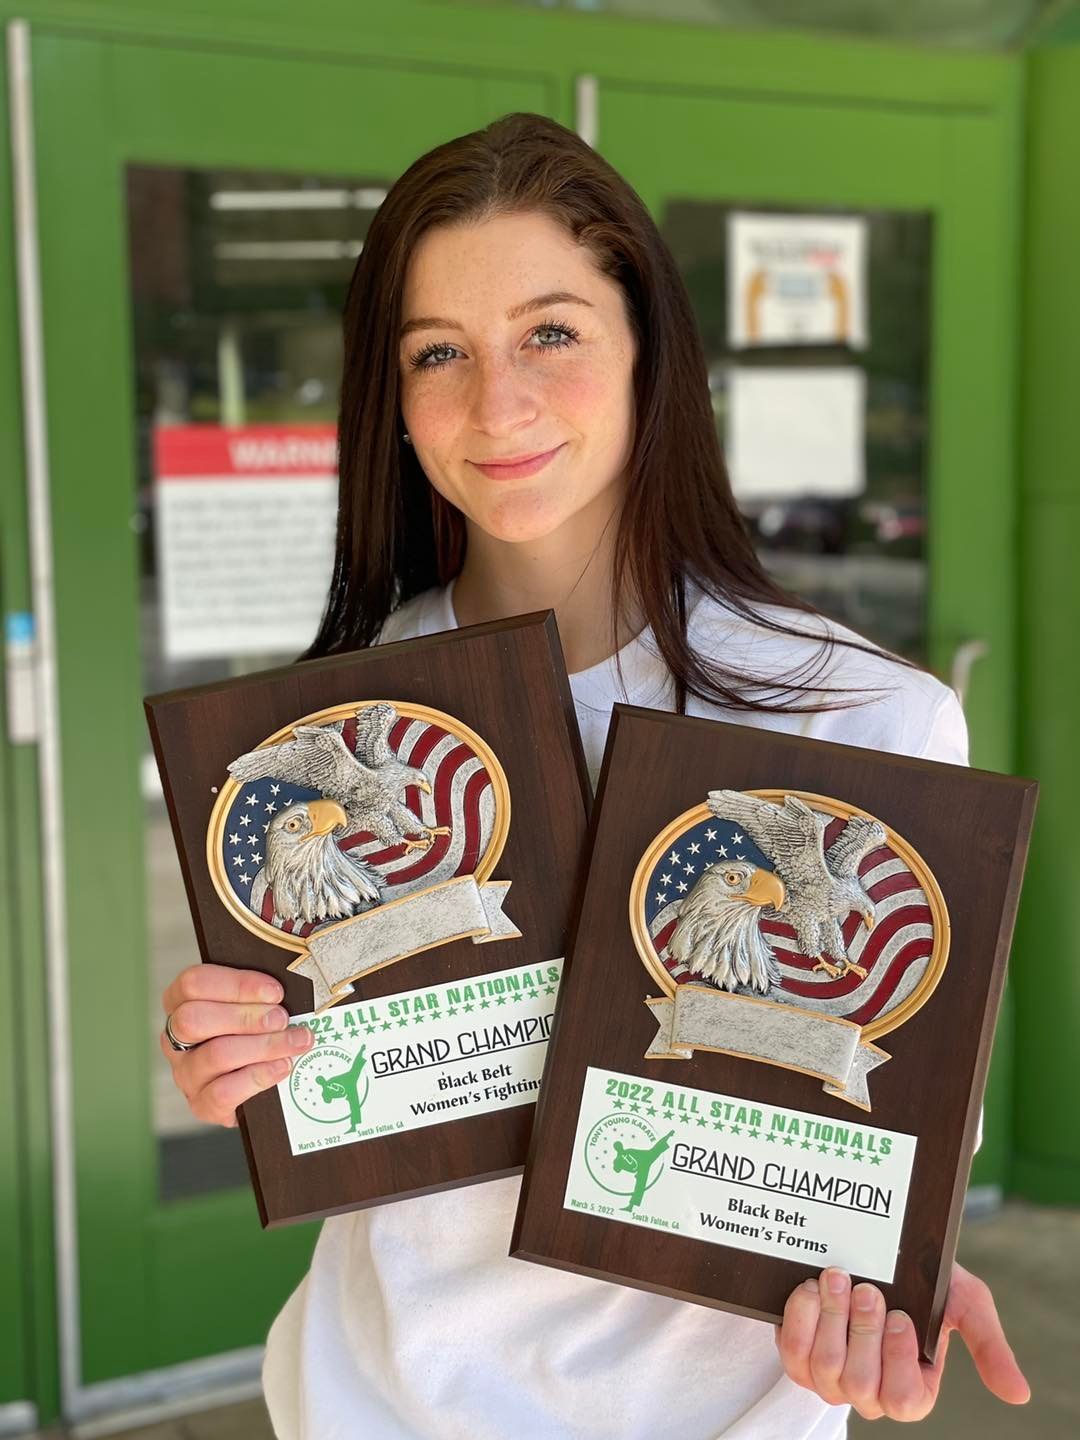 Dani Auberger won both the Women’s combined Forms/Weapons Grand Championship and the Women’s Fighting Grand Championship.